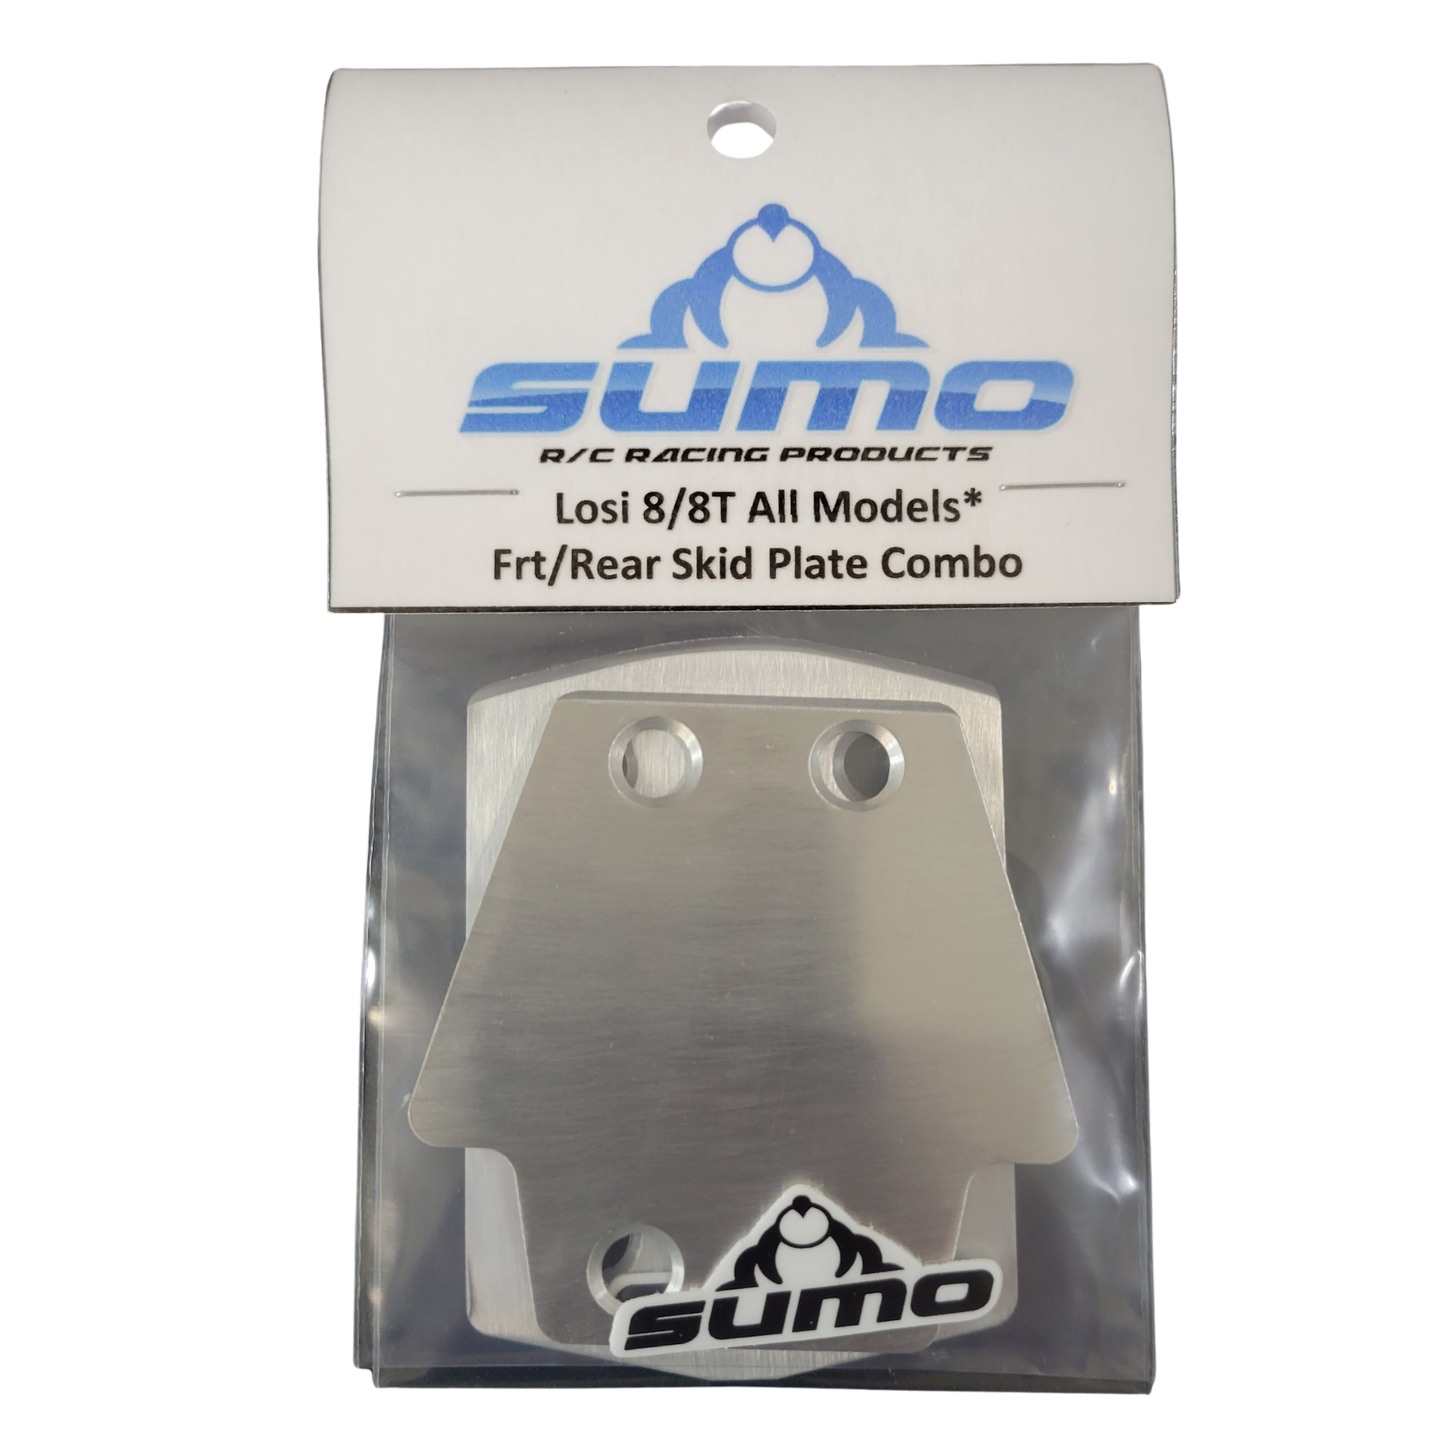 Sumo Racing Skid Plates for Losi 8B / 8T 1.0, 2.0, 3.0, 4.0 and RTR Models